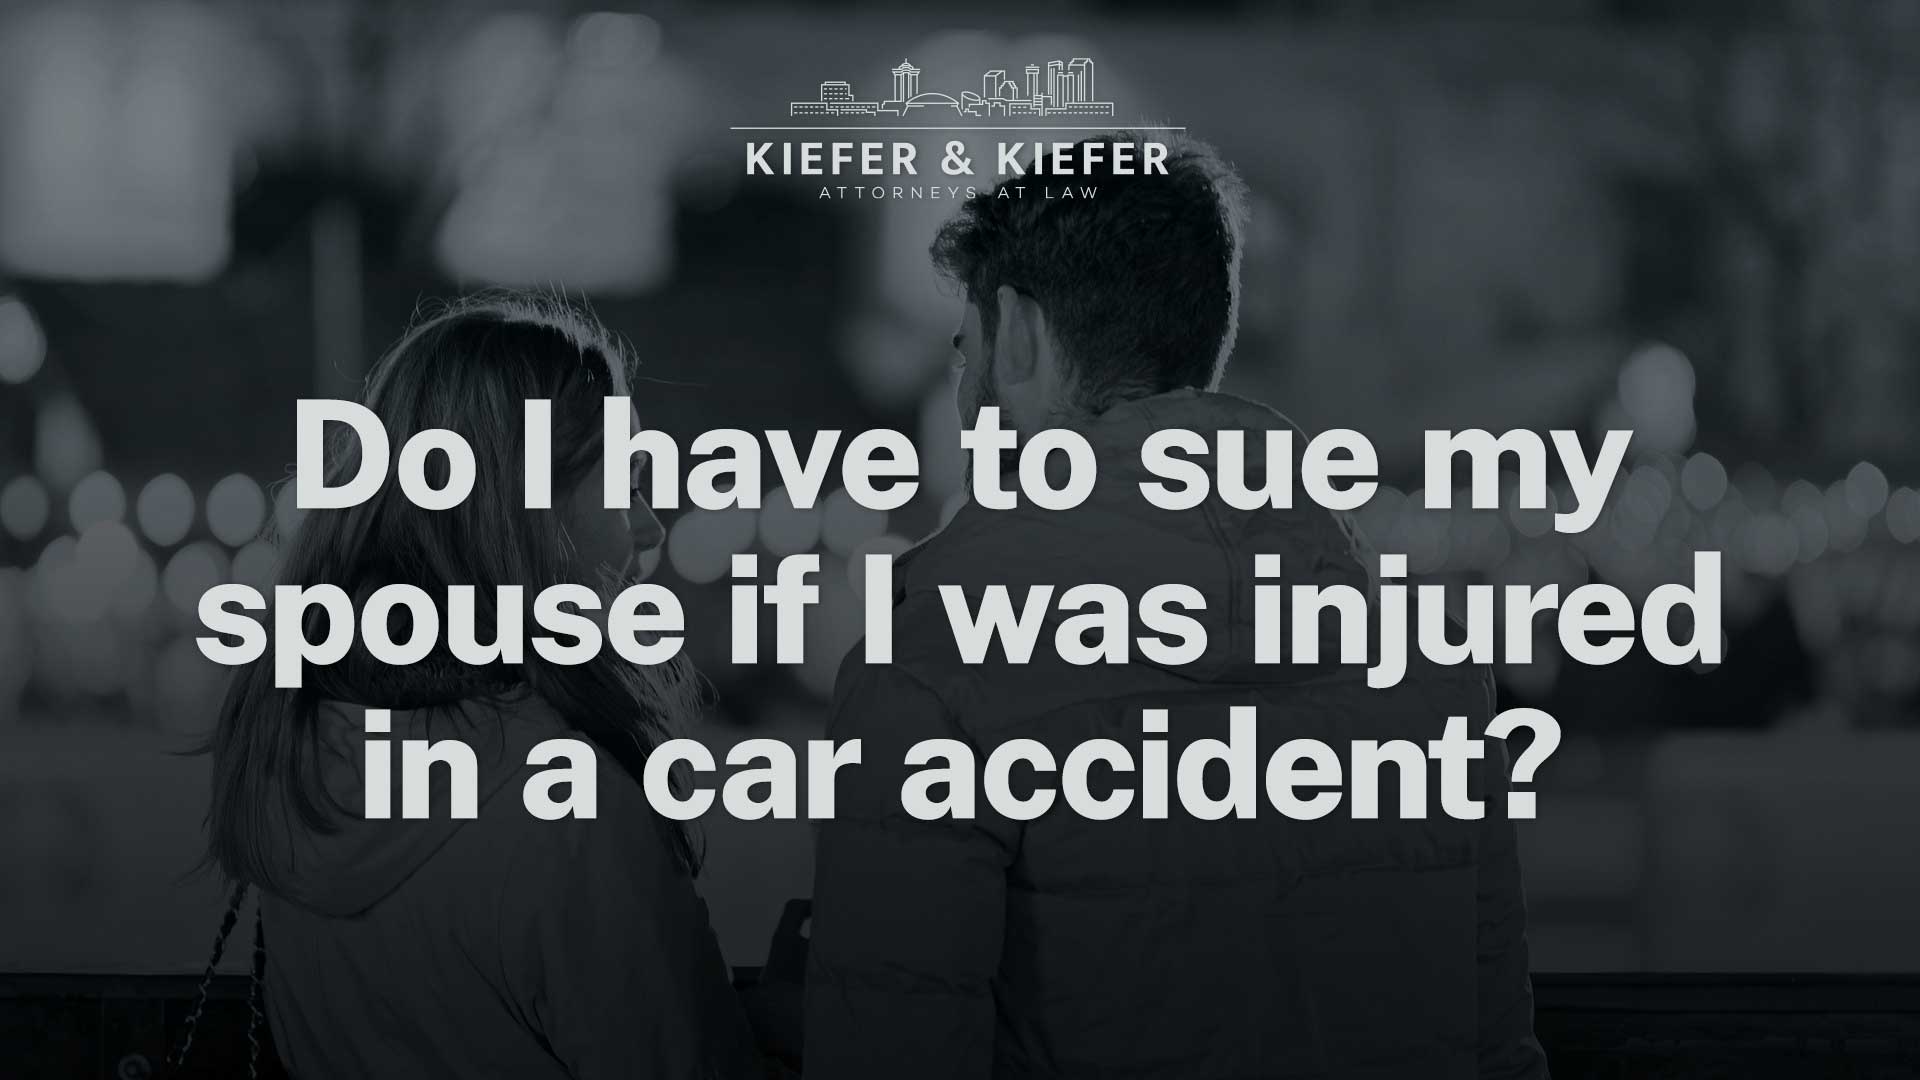 sue my spouse after car accident - kiefer kiefer new orleans injury attorneys